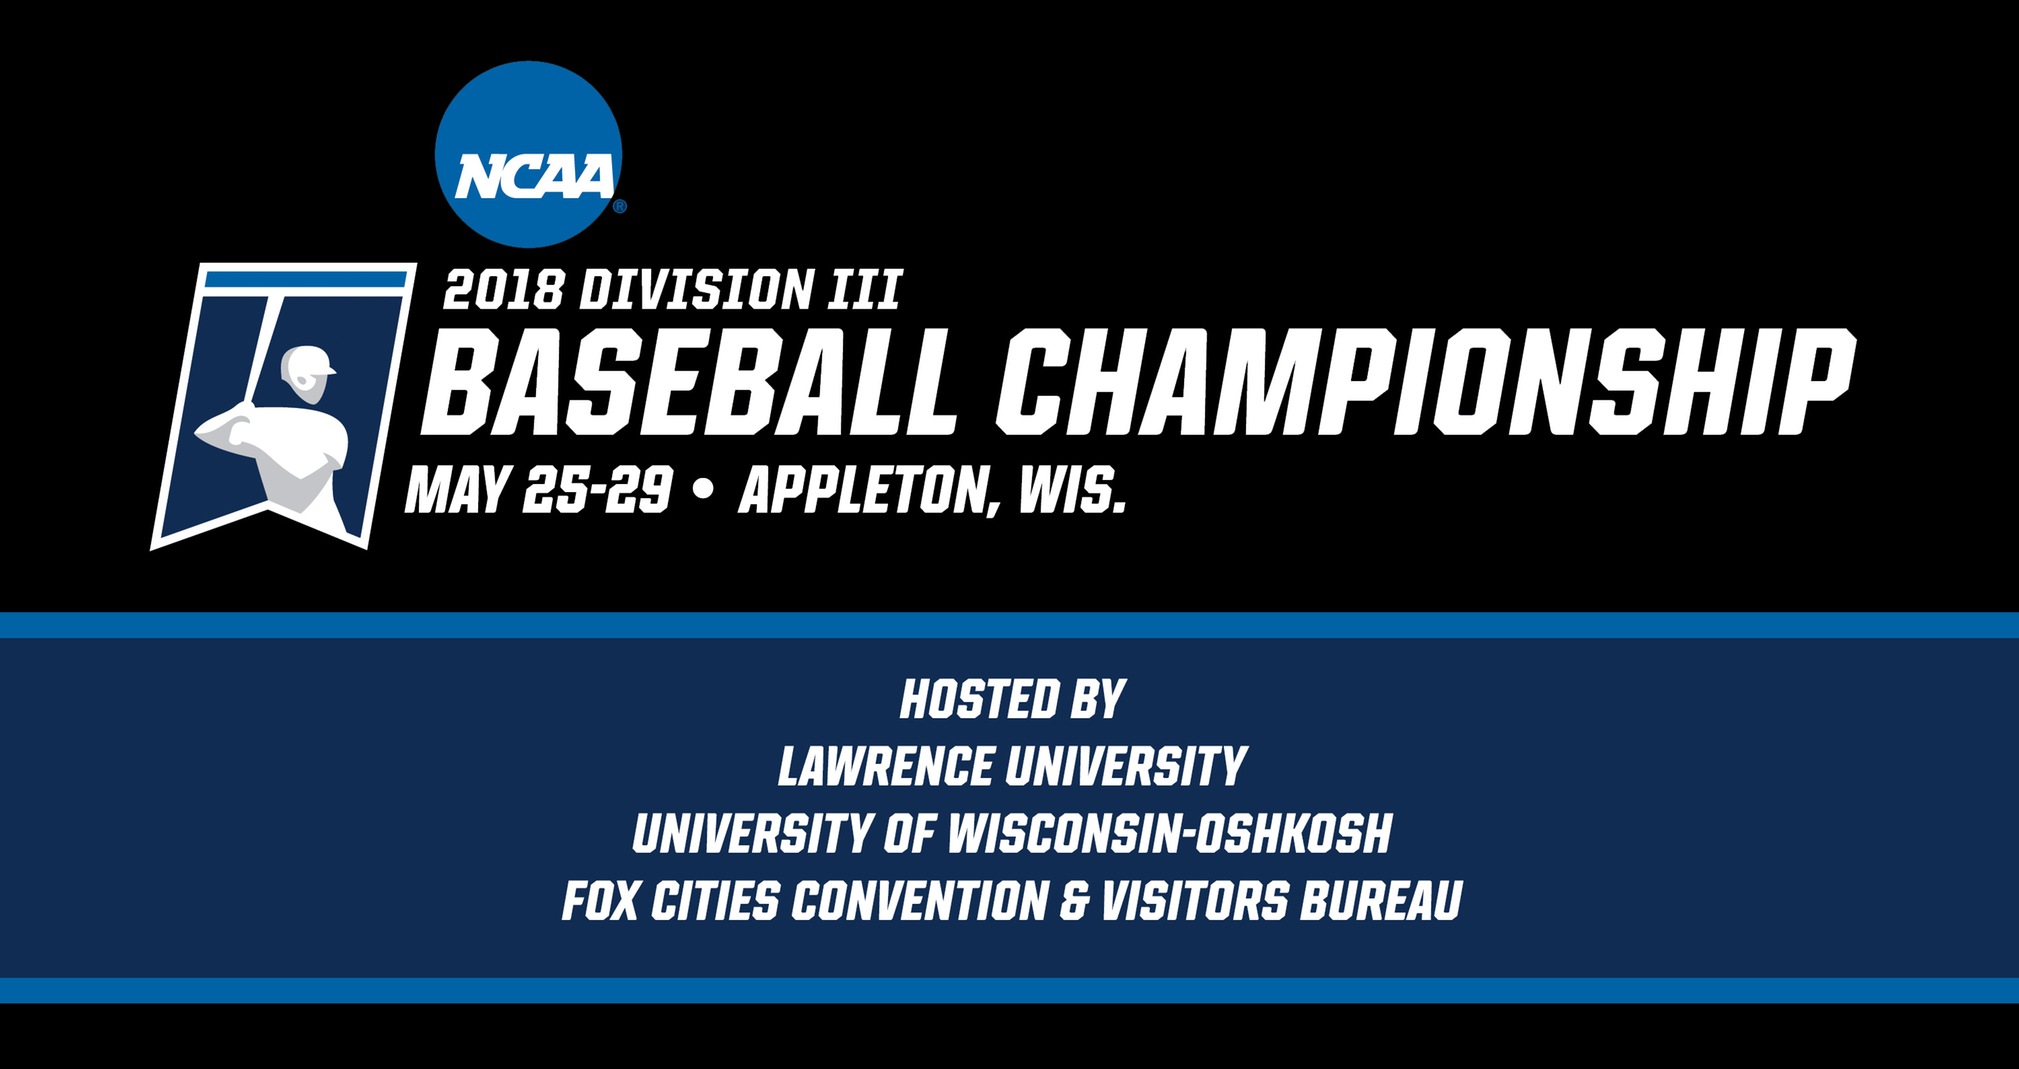 Sale Of Early Bird All-Session Passes For NCAA Baseball Championship Ends May 15